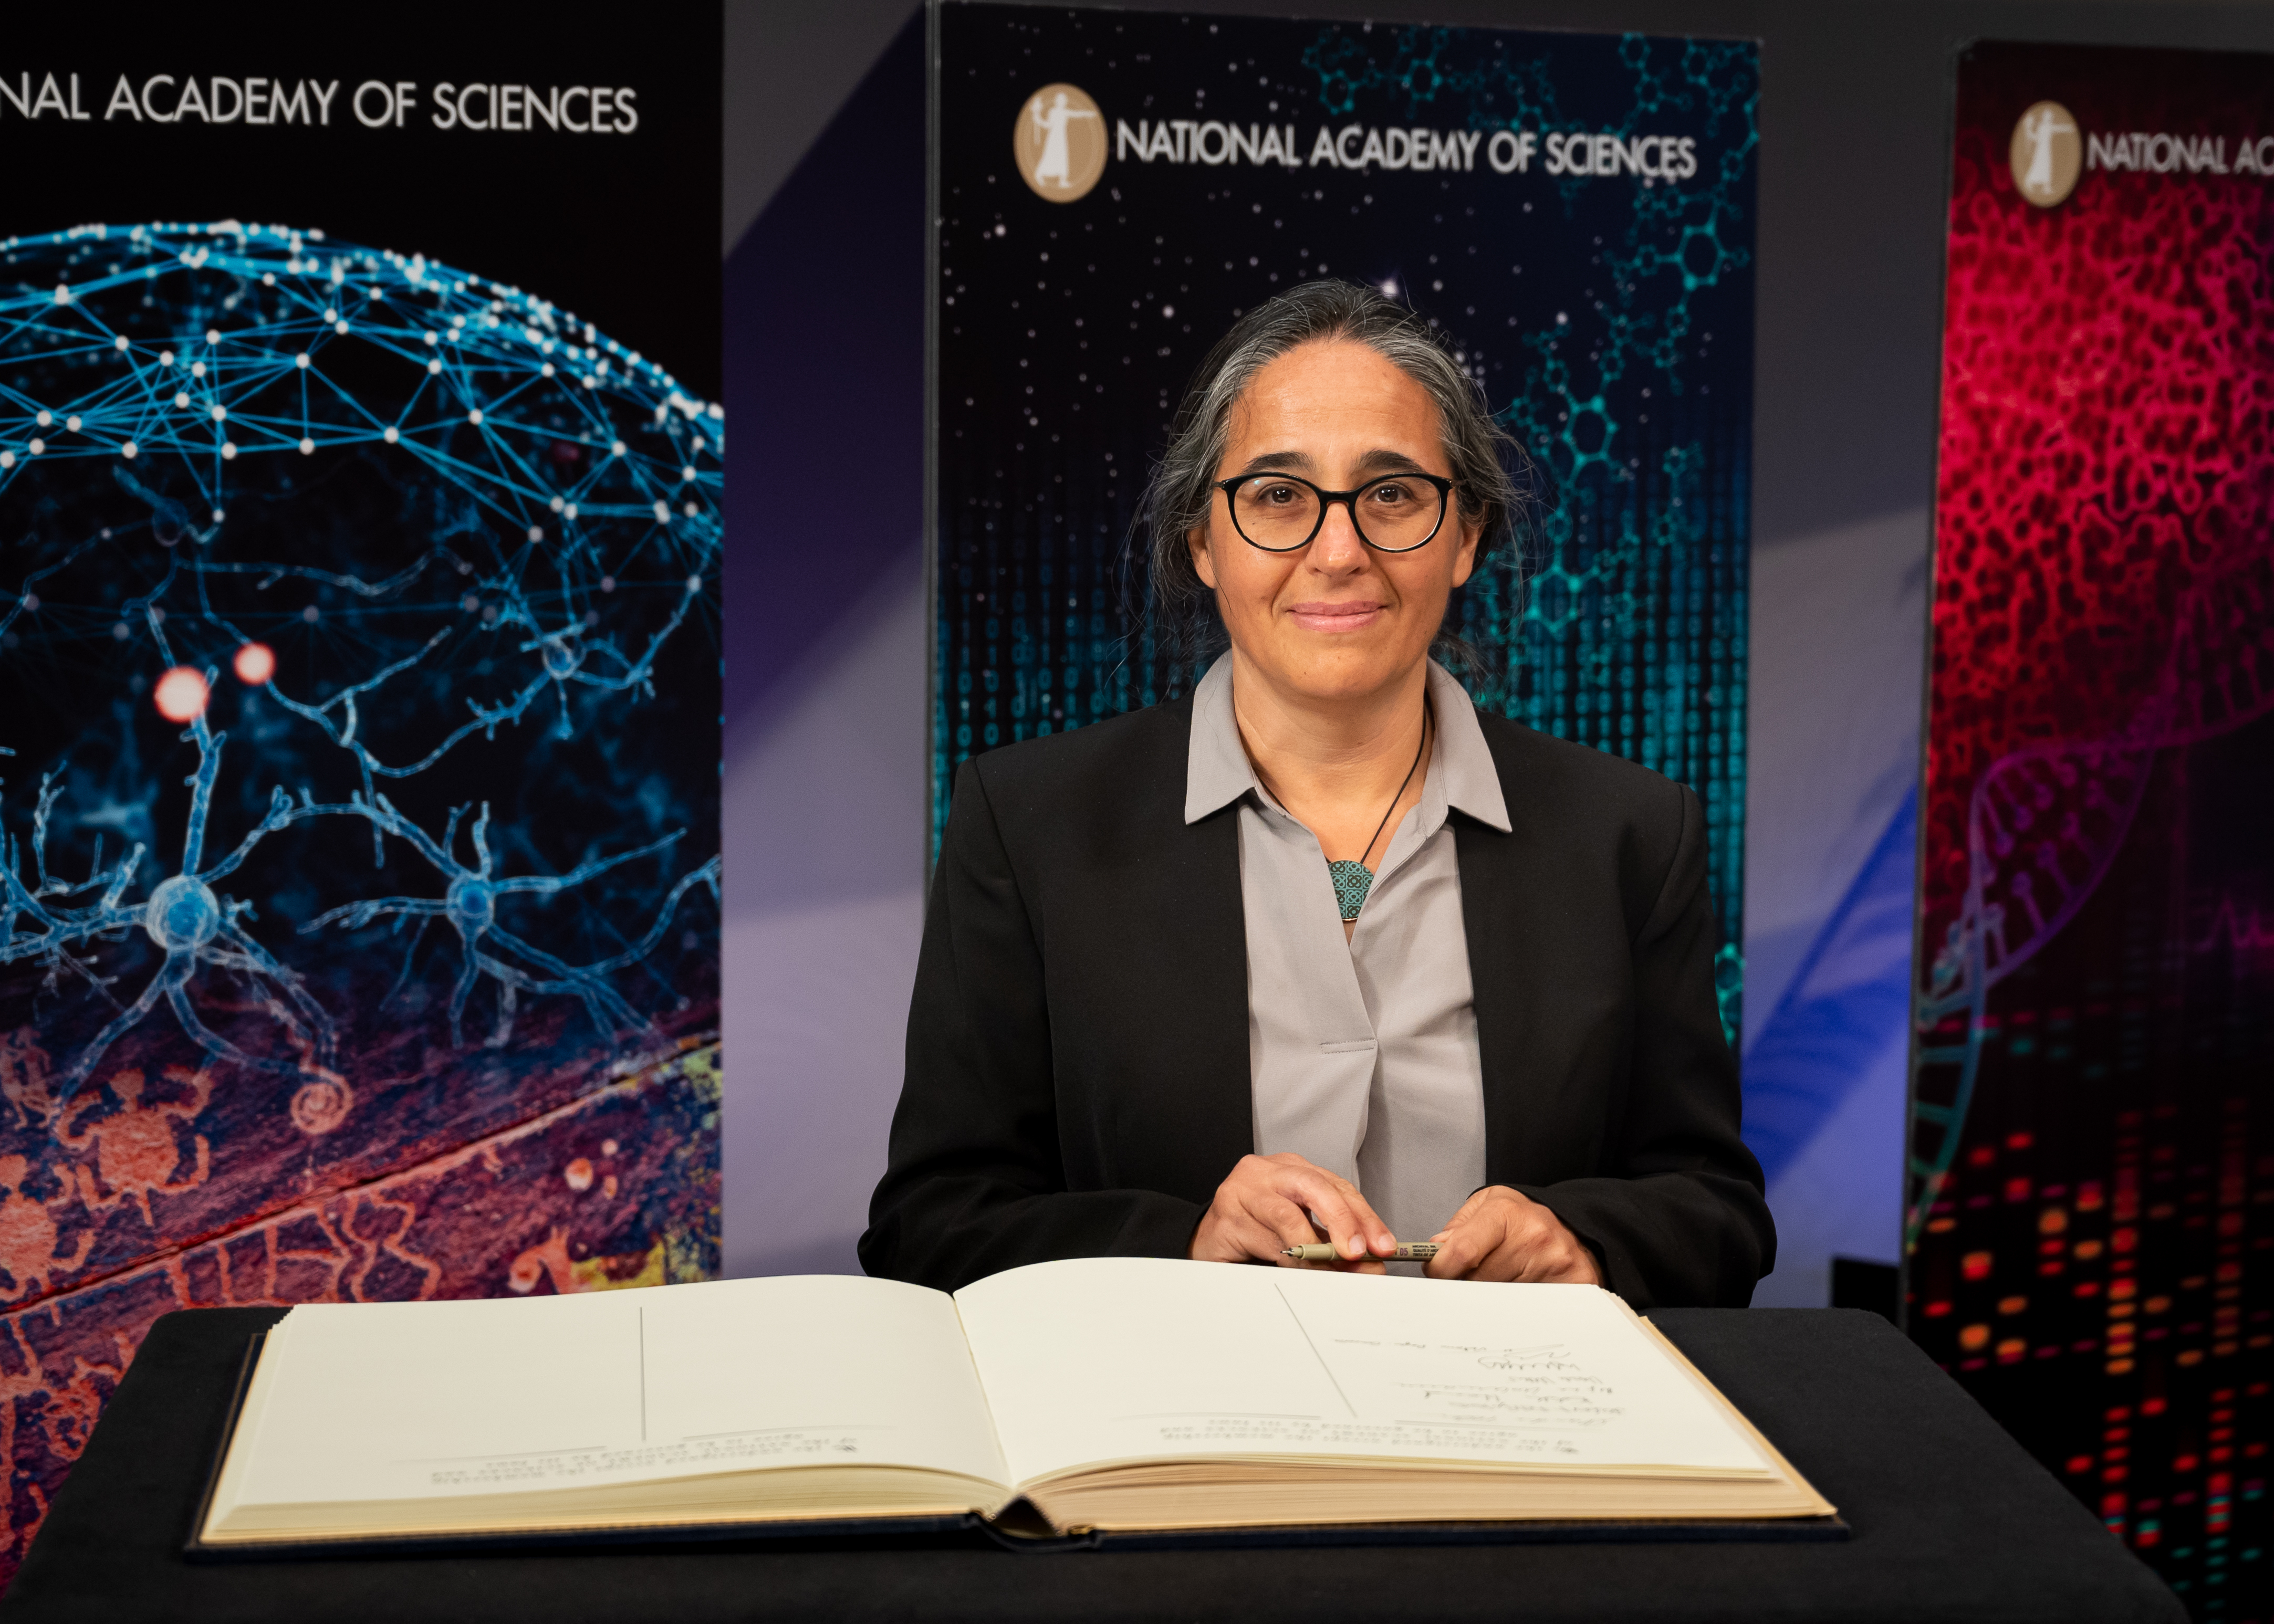 Victoria Reyes-García Repsented in the US National Academy of Sciences